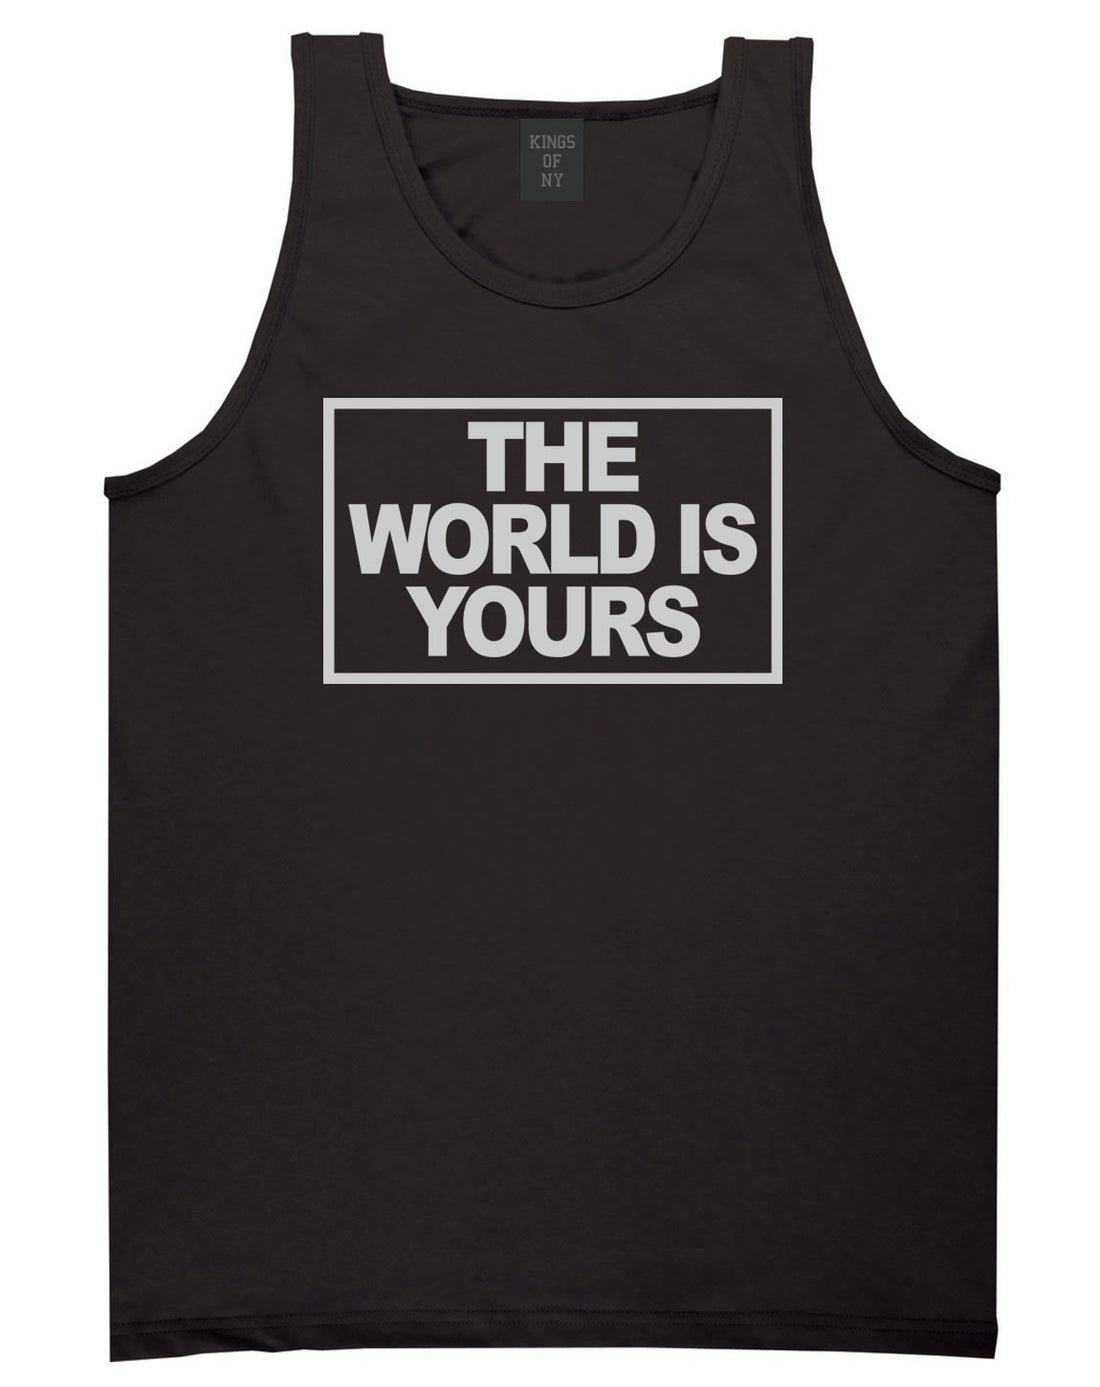 The World Is Yours Tank Top in Black By Kings Of NY